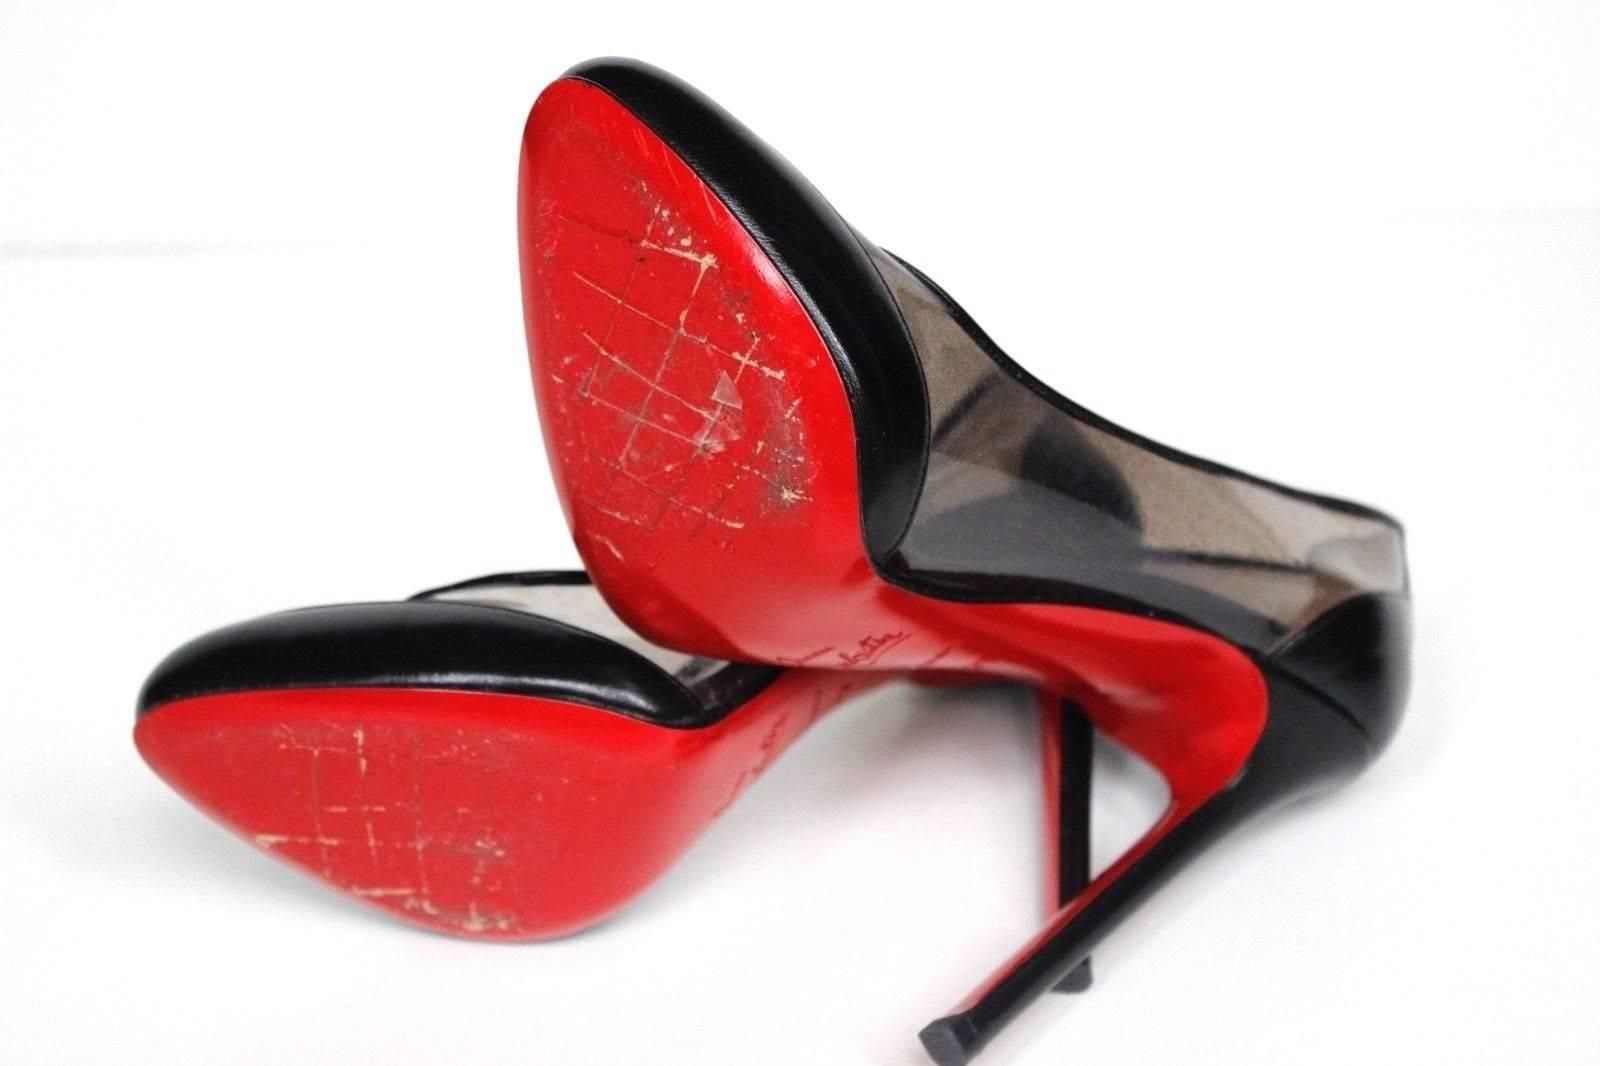 Christian Louboutin Black Pumps Heels 37 uk 4 
A must-have brand for every fashionista.
Black leather heels with semi sheer trim 
Excellent pre owned condition, Worn only on a catwalk show, hence the scratches to the sole to prevent the models